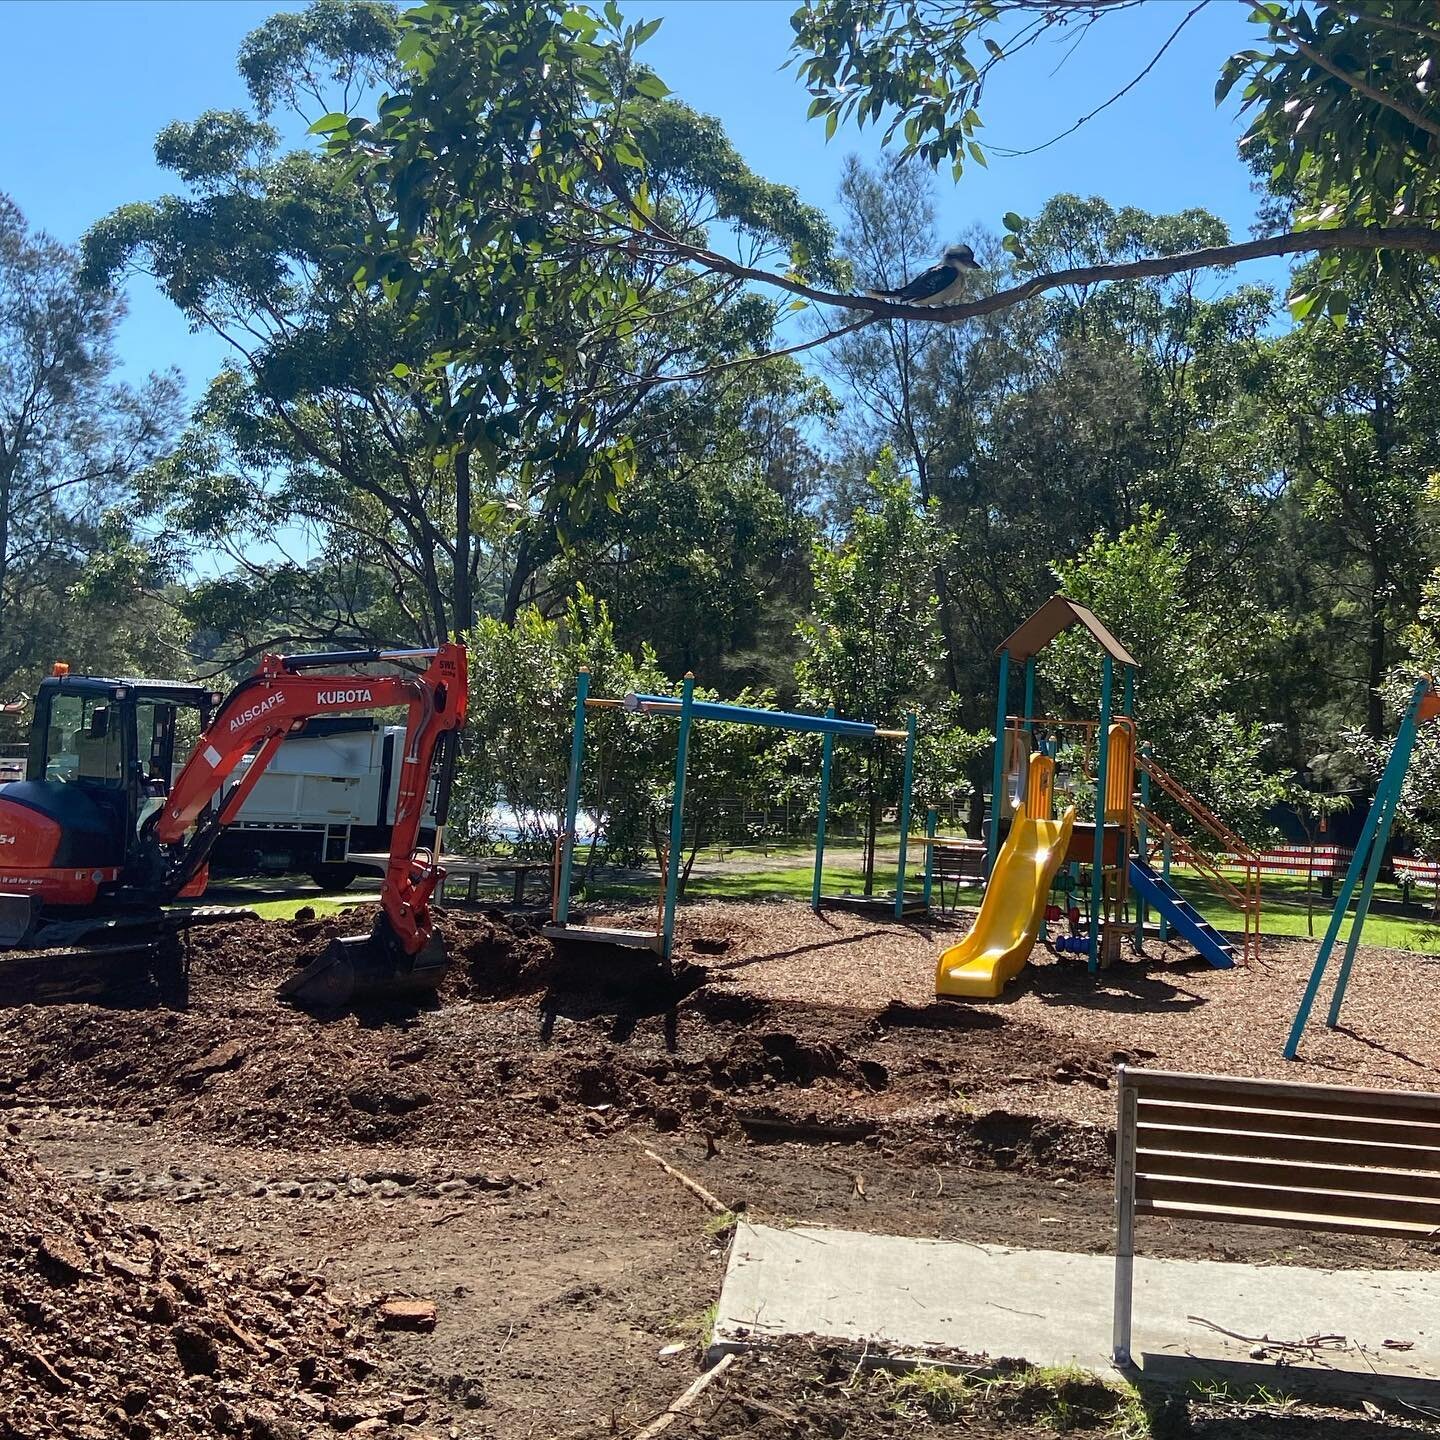 🎶 My Kubota brings all the birds to the yard... 🎶 
Especially the Kookaburras! Always love being on site with an excavator - the Kookaburras are not shy and they swoop down and get all the worms!! 🪱 #ballsybird 
Hard to spot the one on the pile of